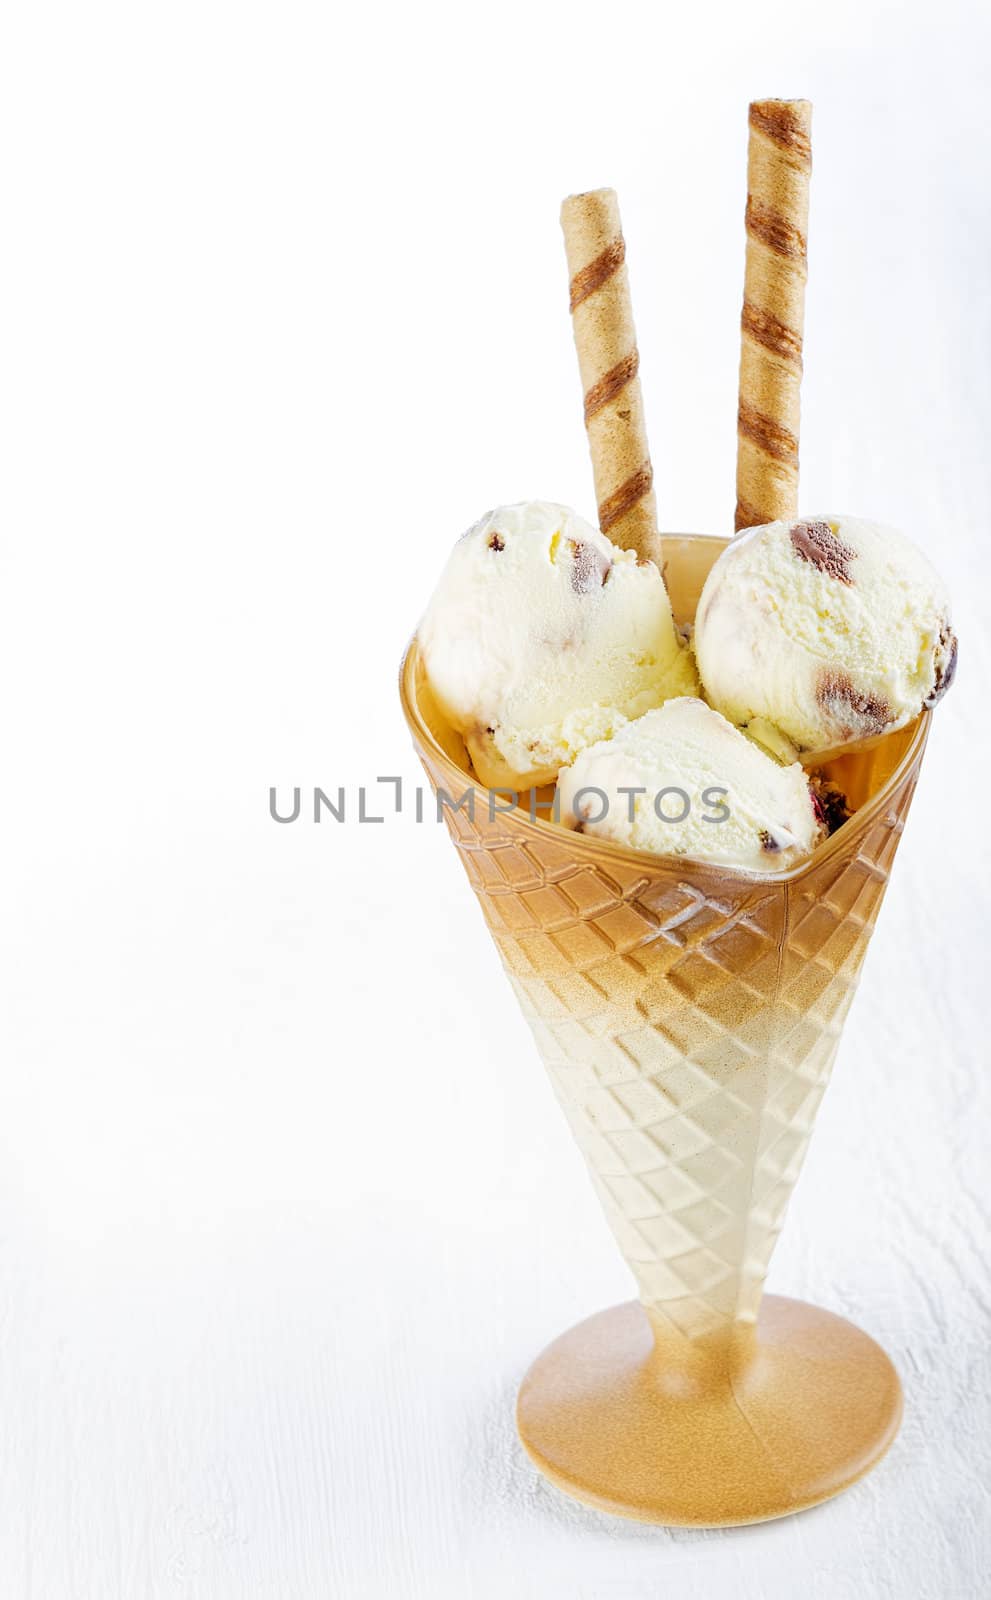 Vanilla ice cream  with wafer in cup on white wooden background